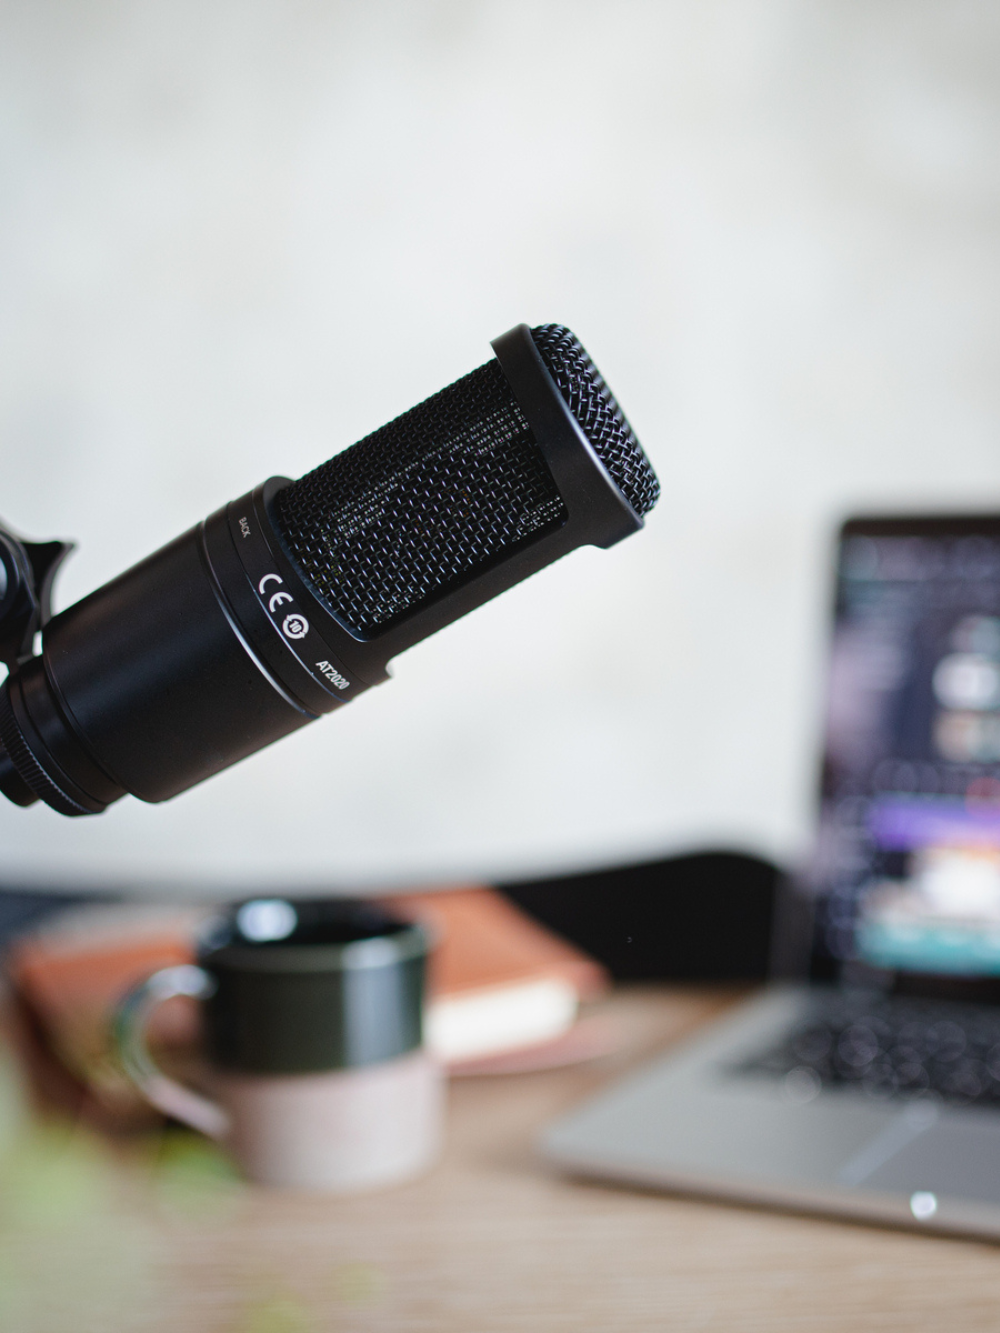 Audio-Technica XLR or USB Microphone: Everything You Need to Know